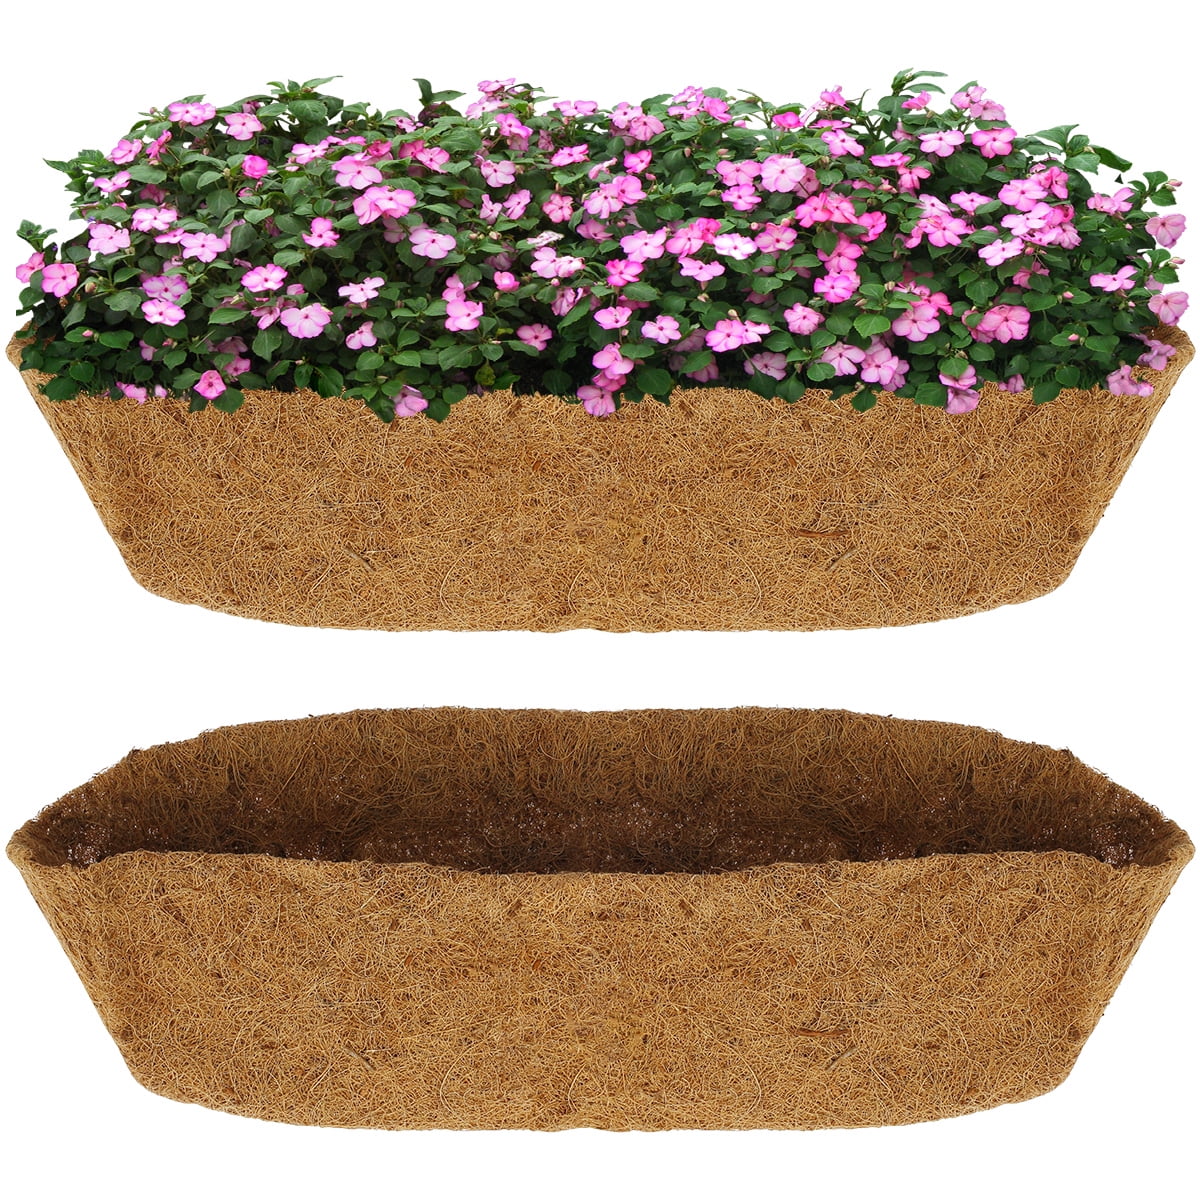 2Pc Trough Coco Liners 30 inch Replacement Coconut Fiber Liner Wall BSKT Planter 